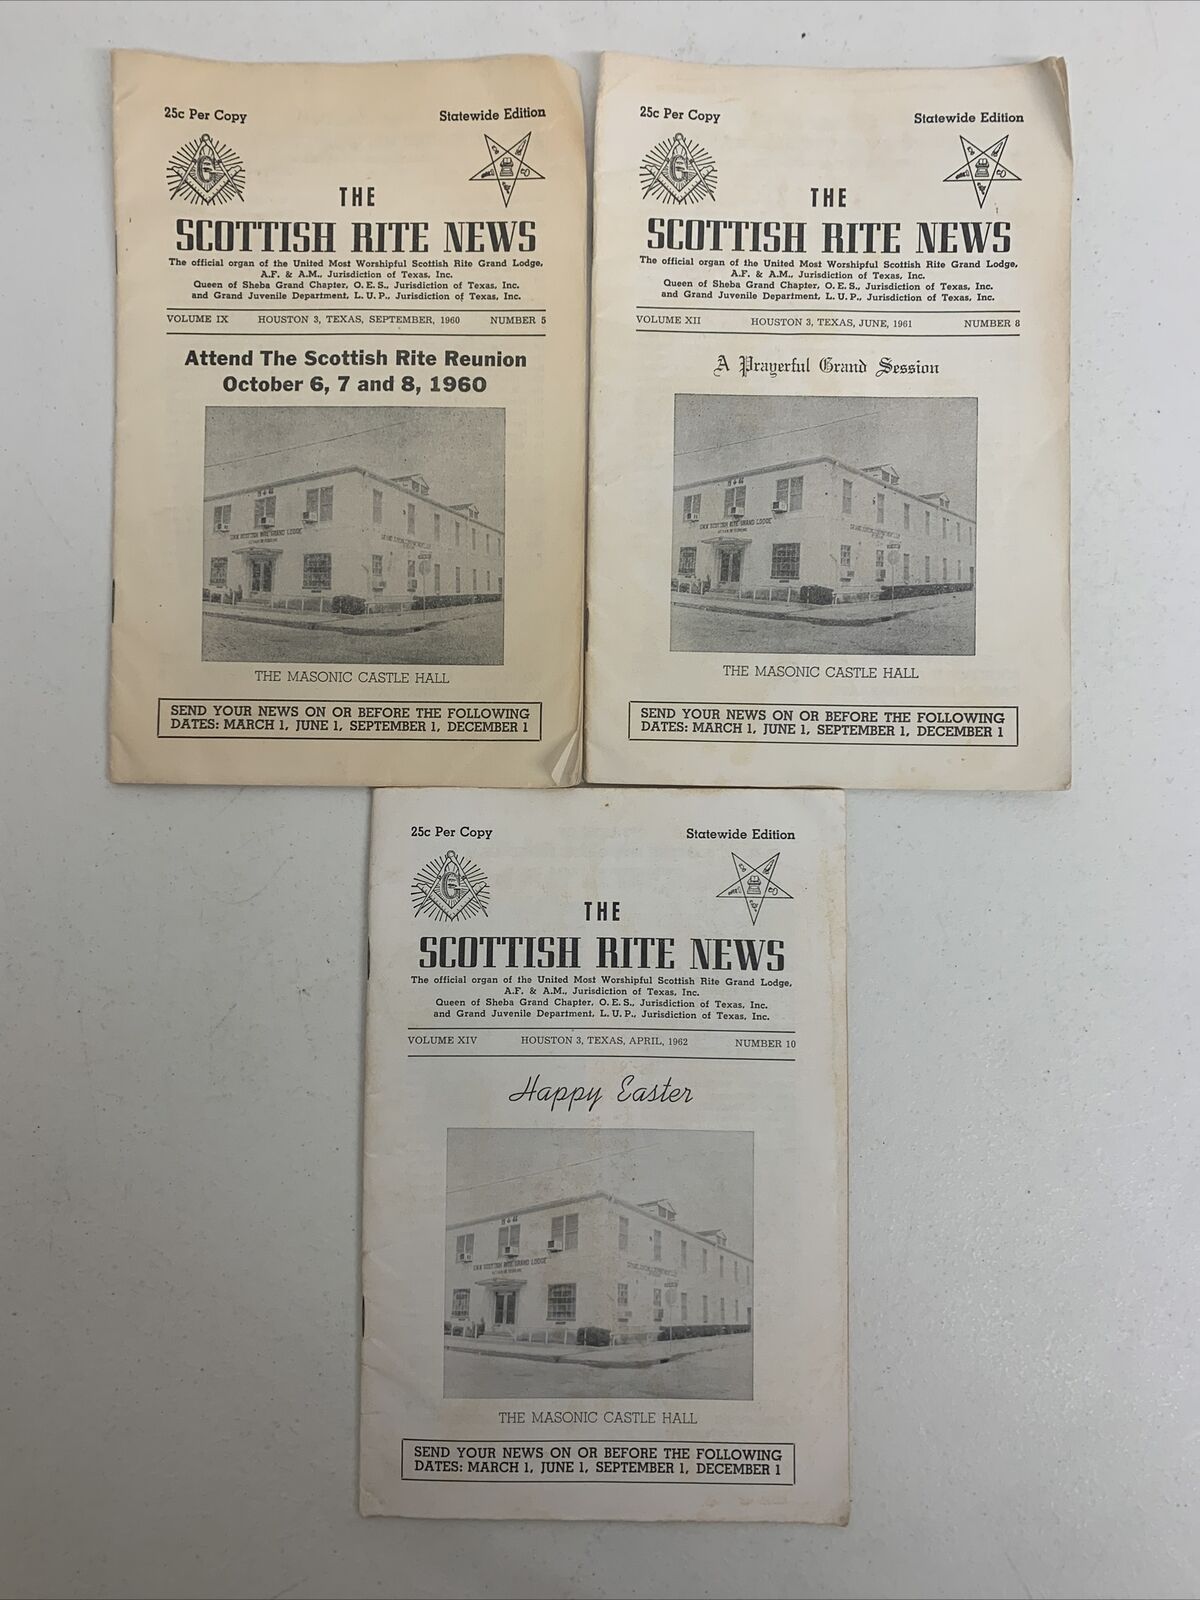 3 The Scottish Rite News pamphlets Texas Statewide Edition 1960s